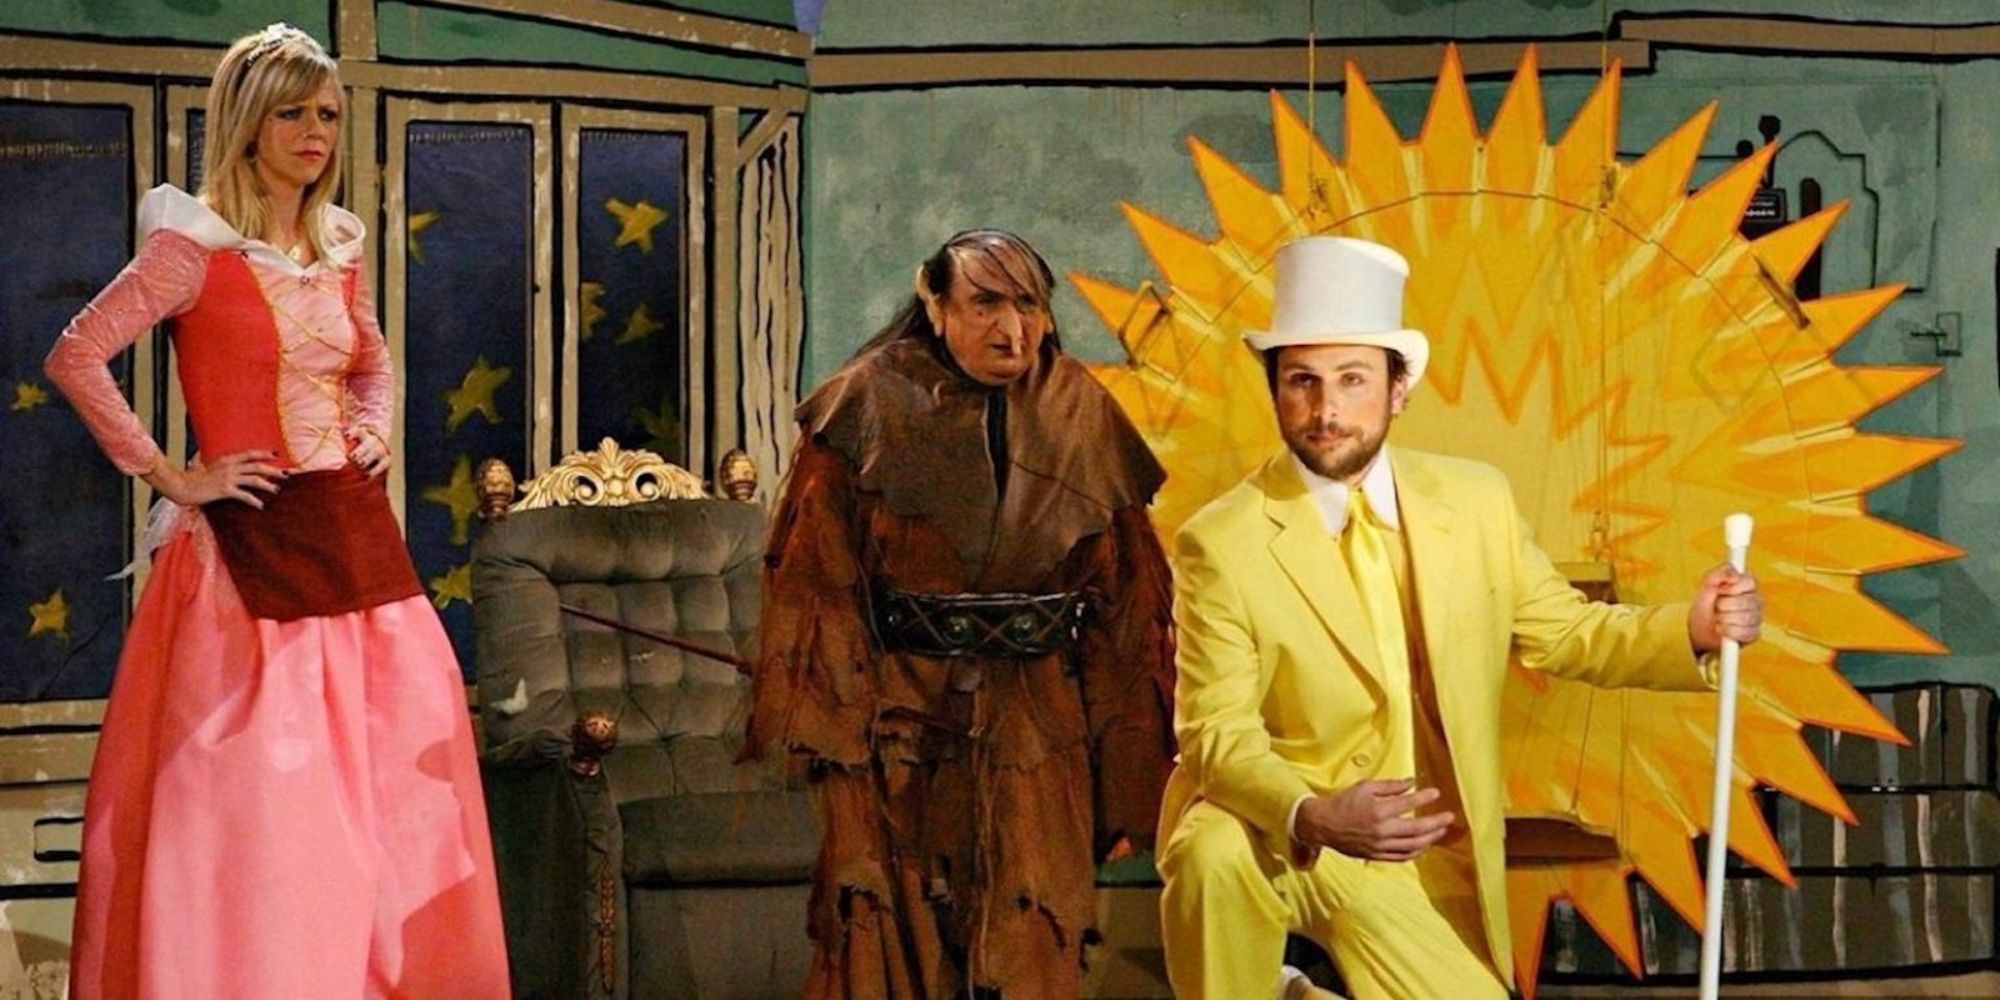 Charlie Day, Danny DeVito, and Kaitlin Olsen in the Dayman play in It's Always Sunny in Philadelphia